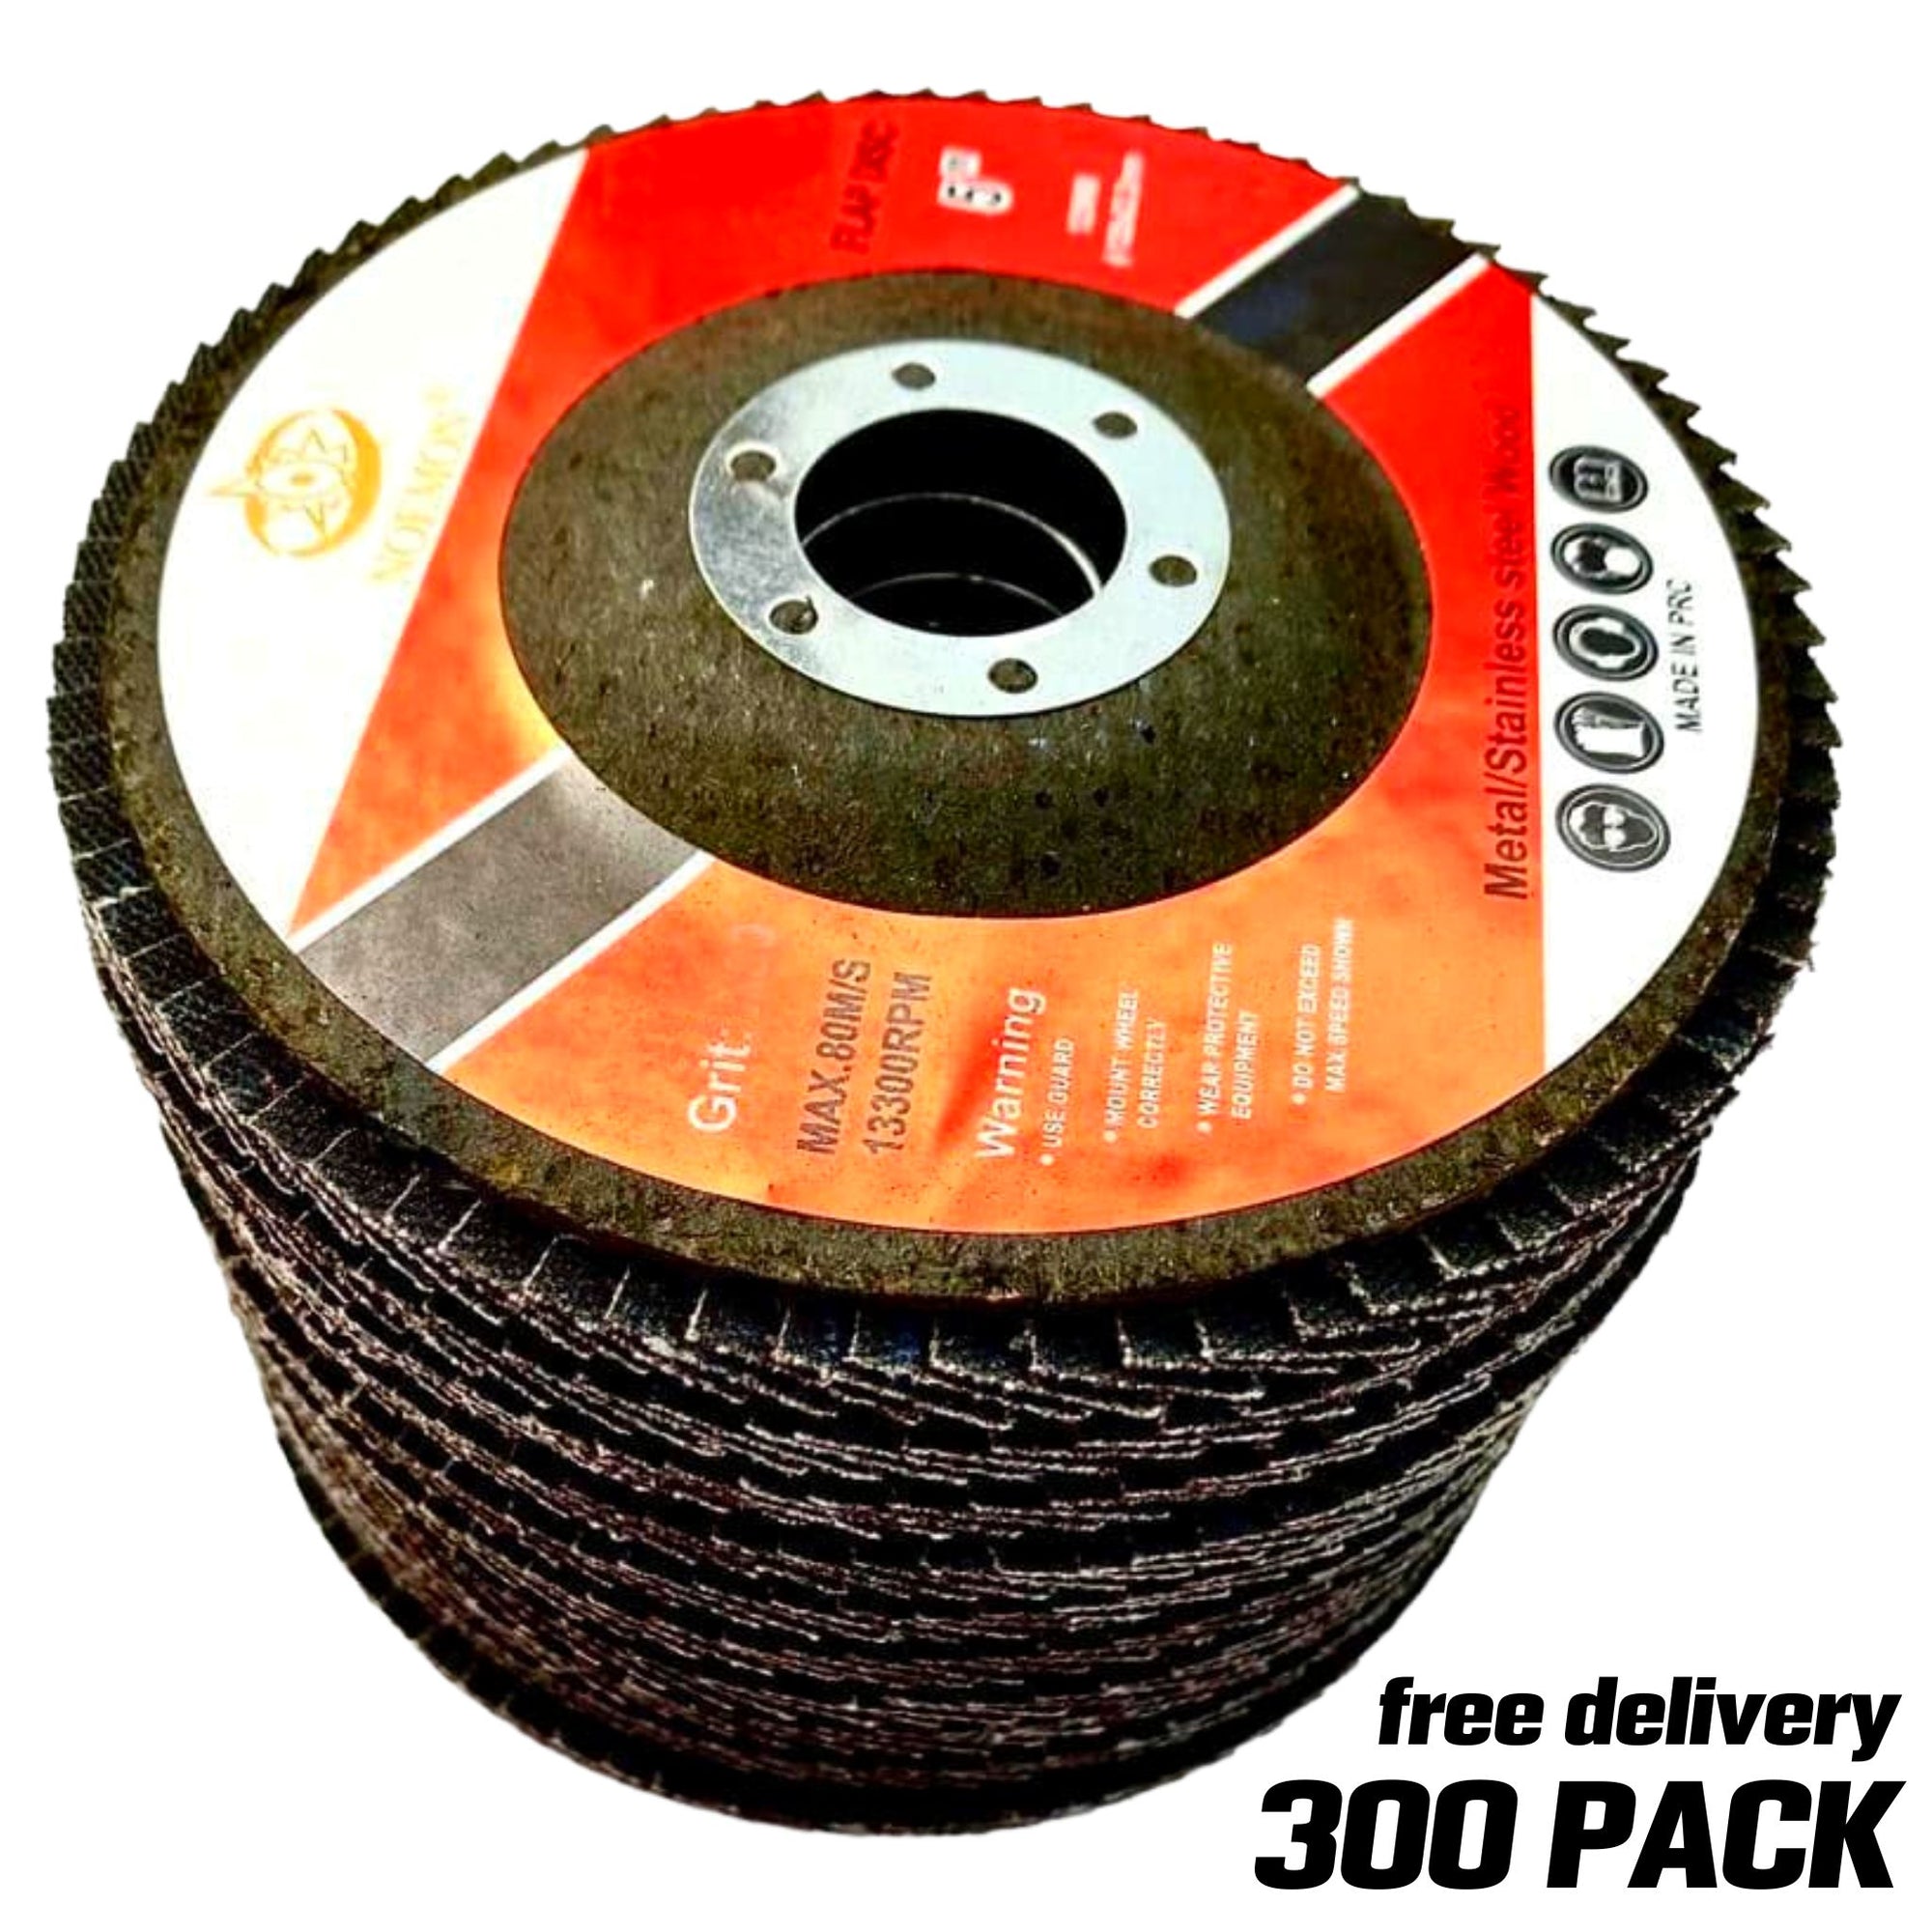 300 PACK - 125mm (5”) Flap Disc 60 Grit - South East Clearance Centre